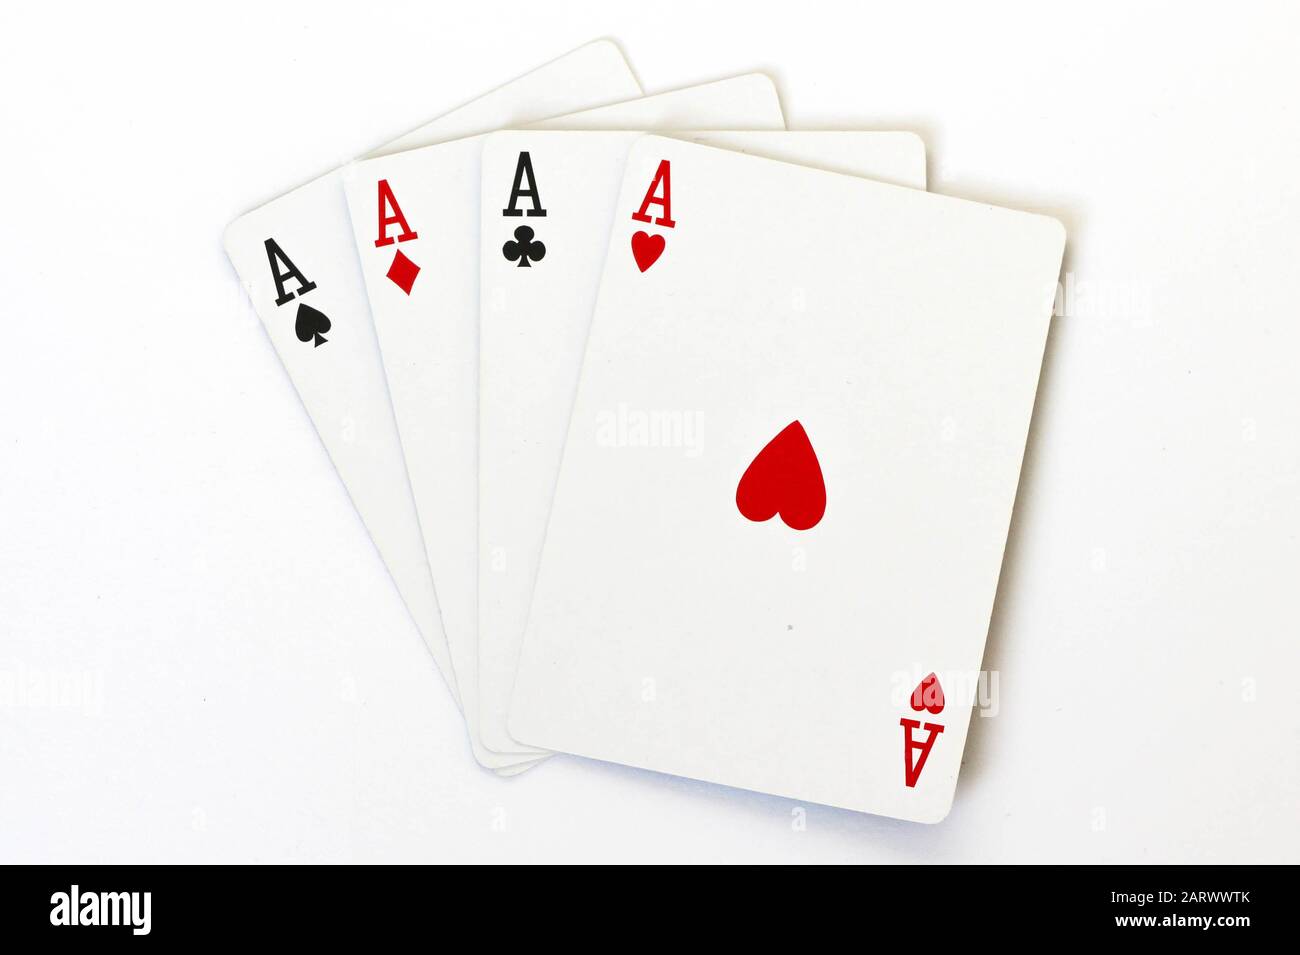 4 aces (playing cards) on a white background Stock Photo